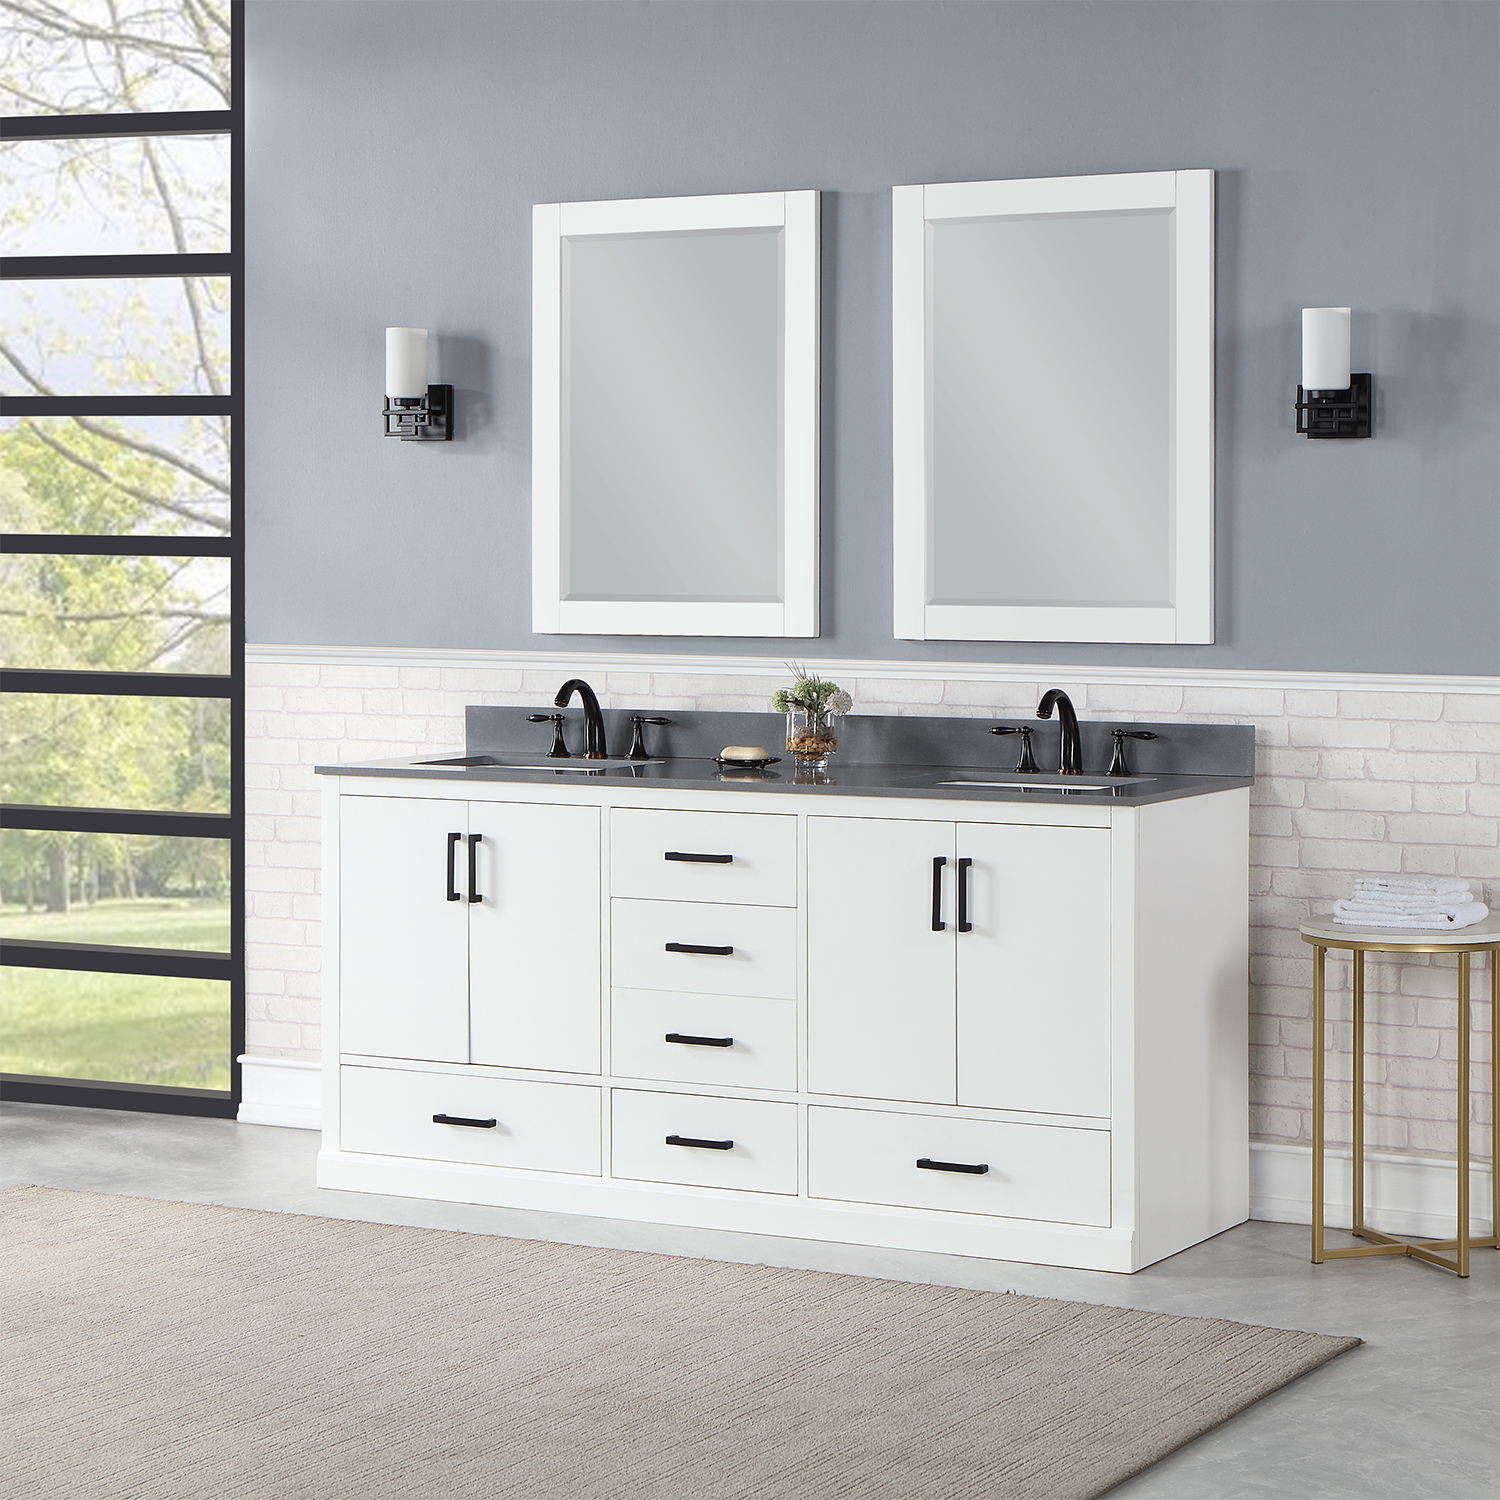 Issac Edwards Collection 72" Double Bathroom Vanity Set in White with Concrete Grey Composite Stone Countertop without Mirror